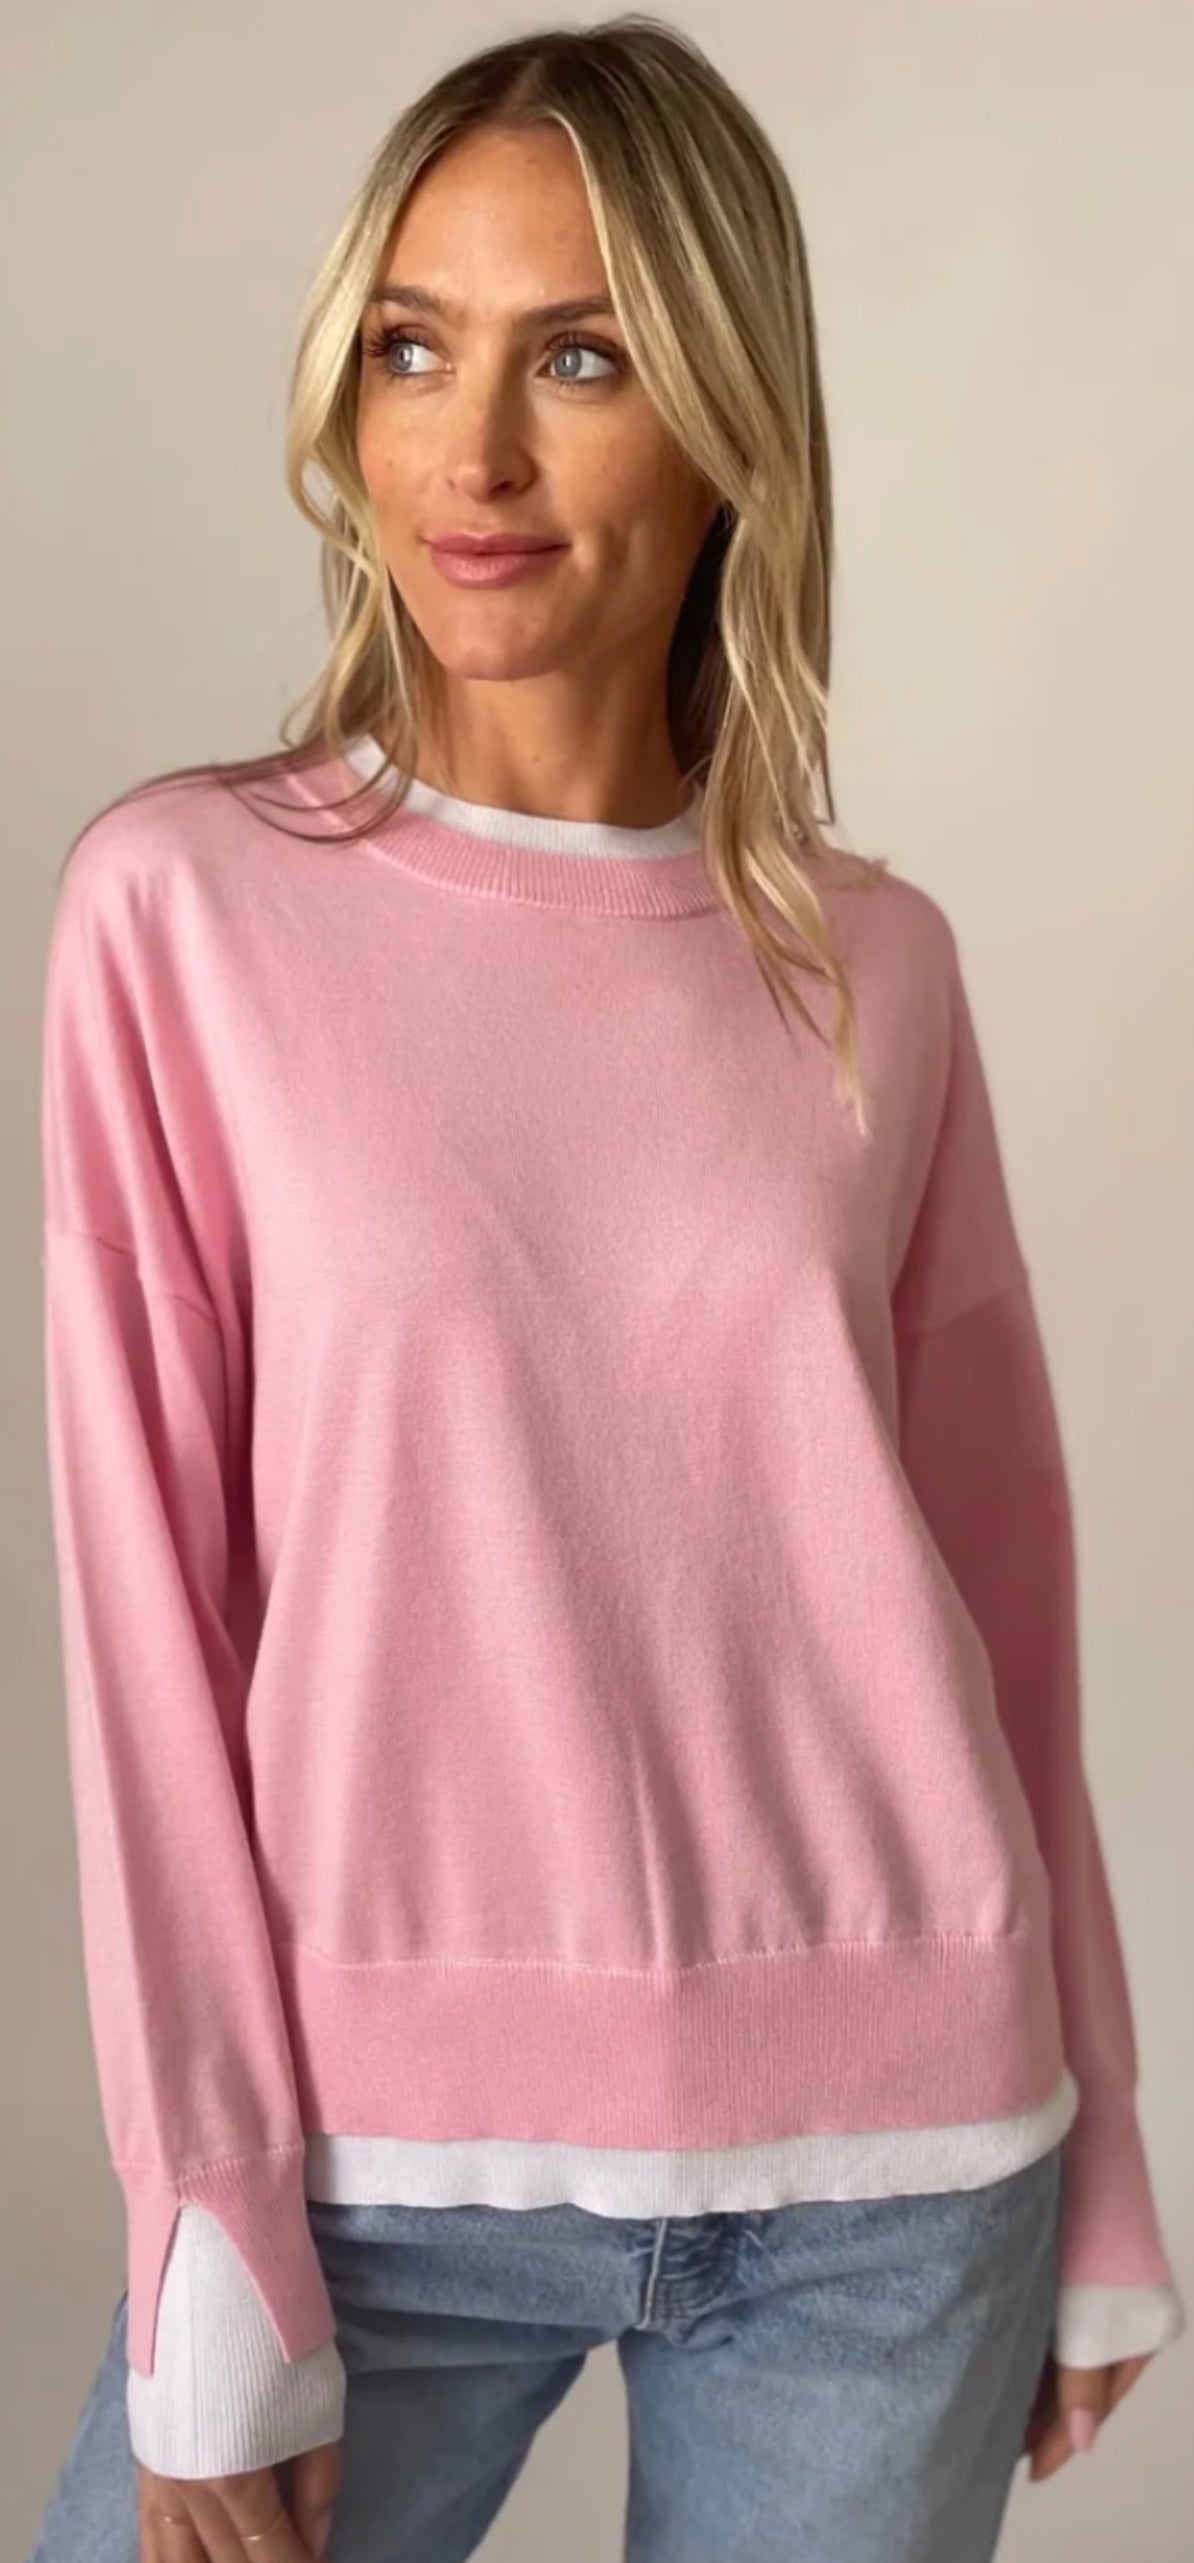 Six Fifty pink Claire sweater with white inserts